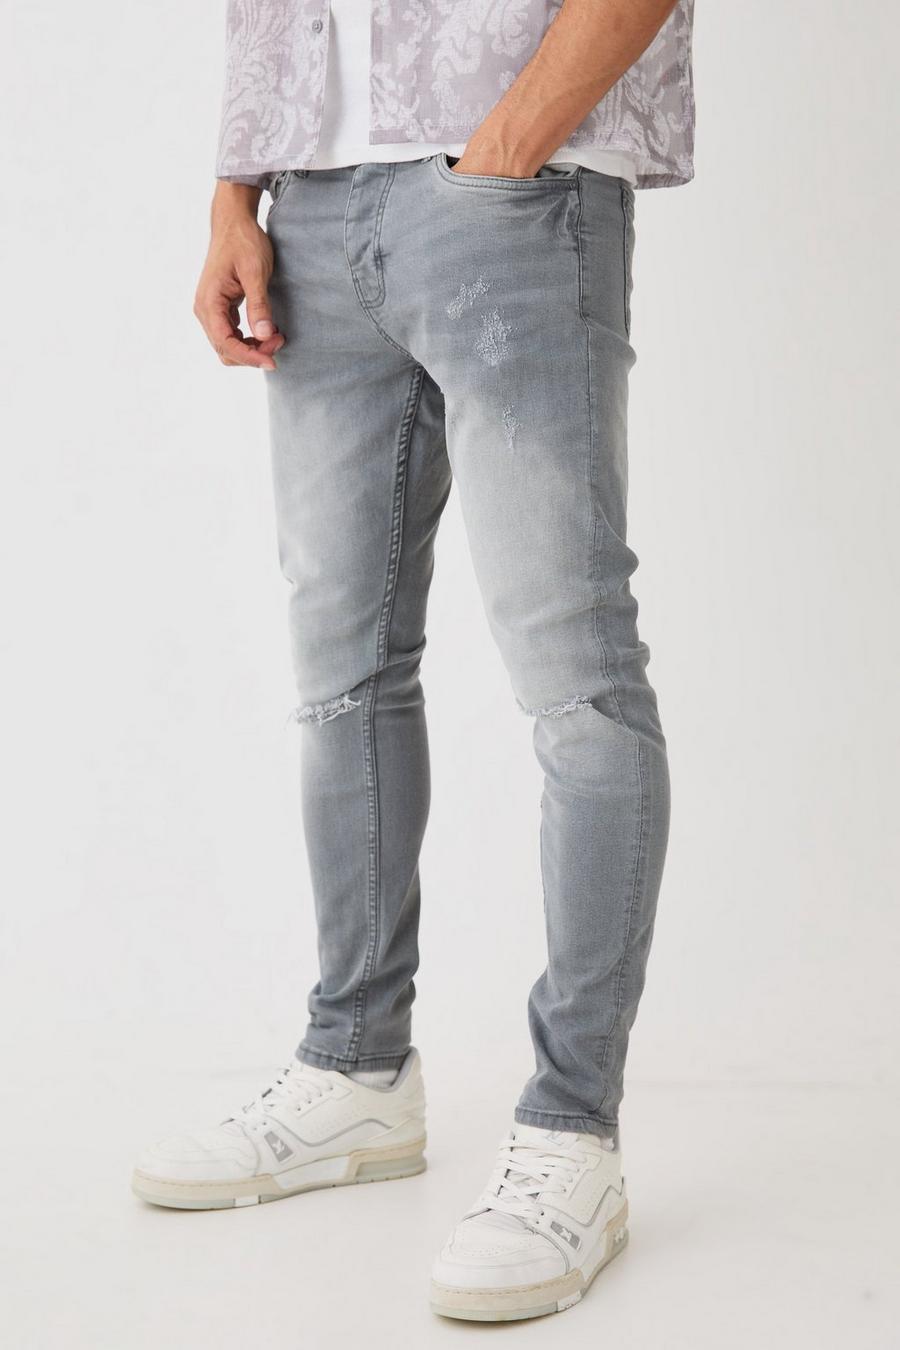 Ice grey Skinny Stretch Paint Splatter Ripped Jeans